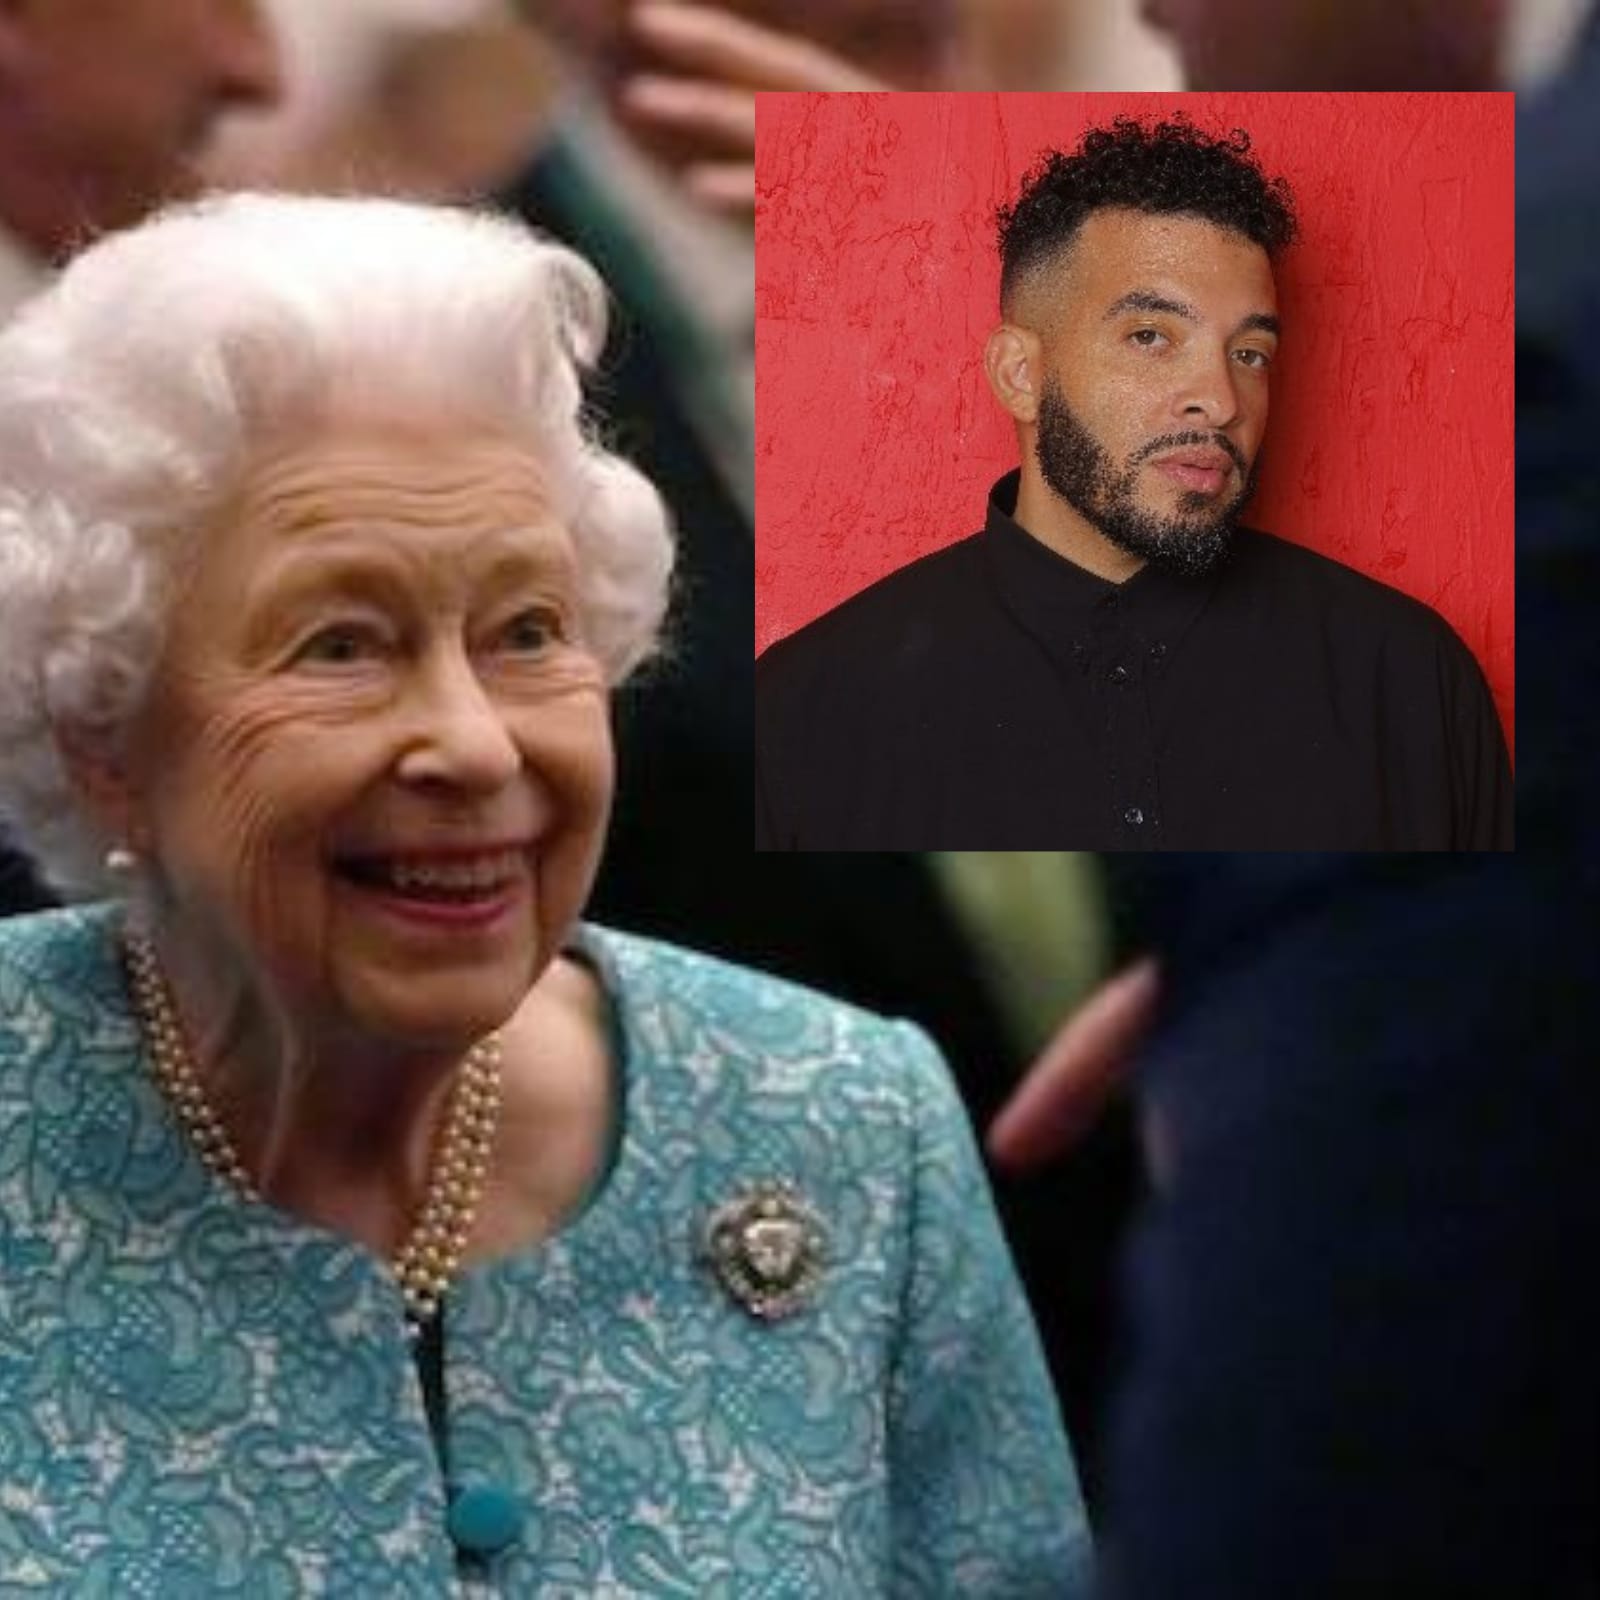 Queen Elizabeth The First Gets Fucked